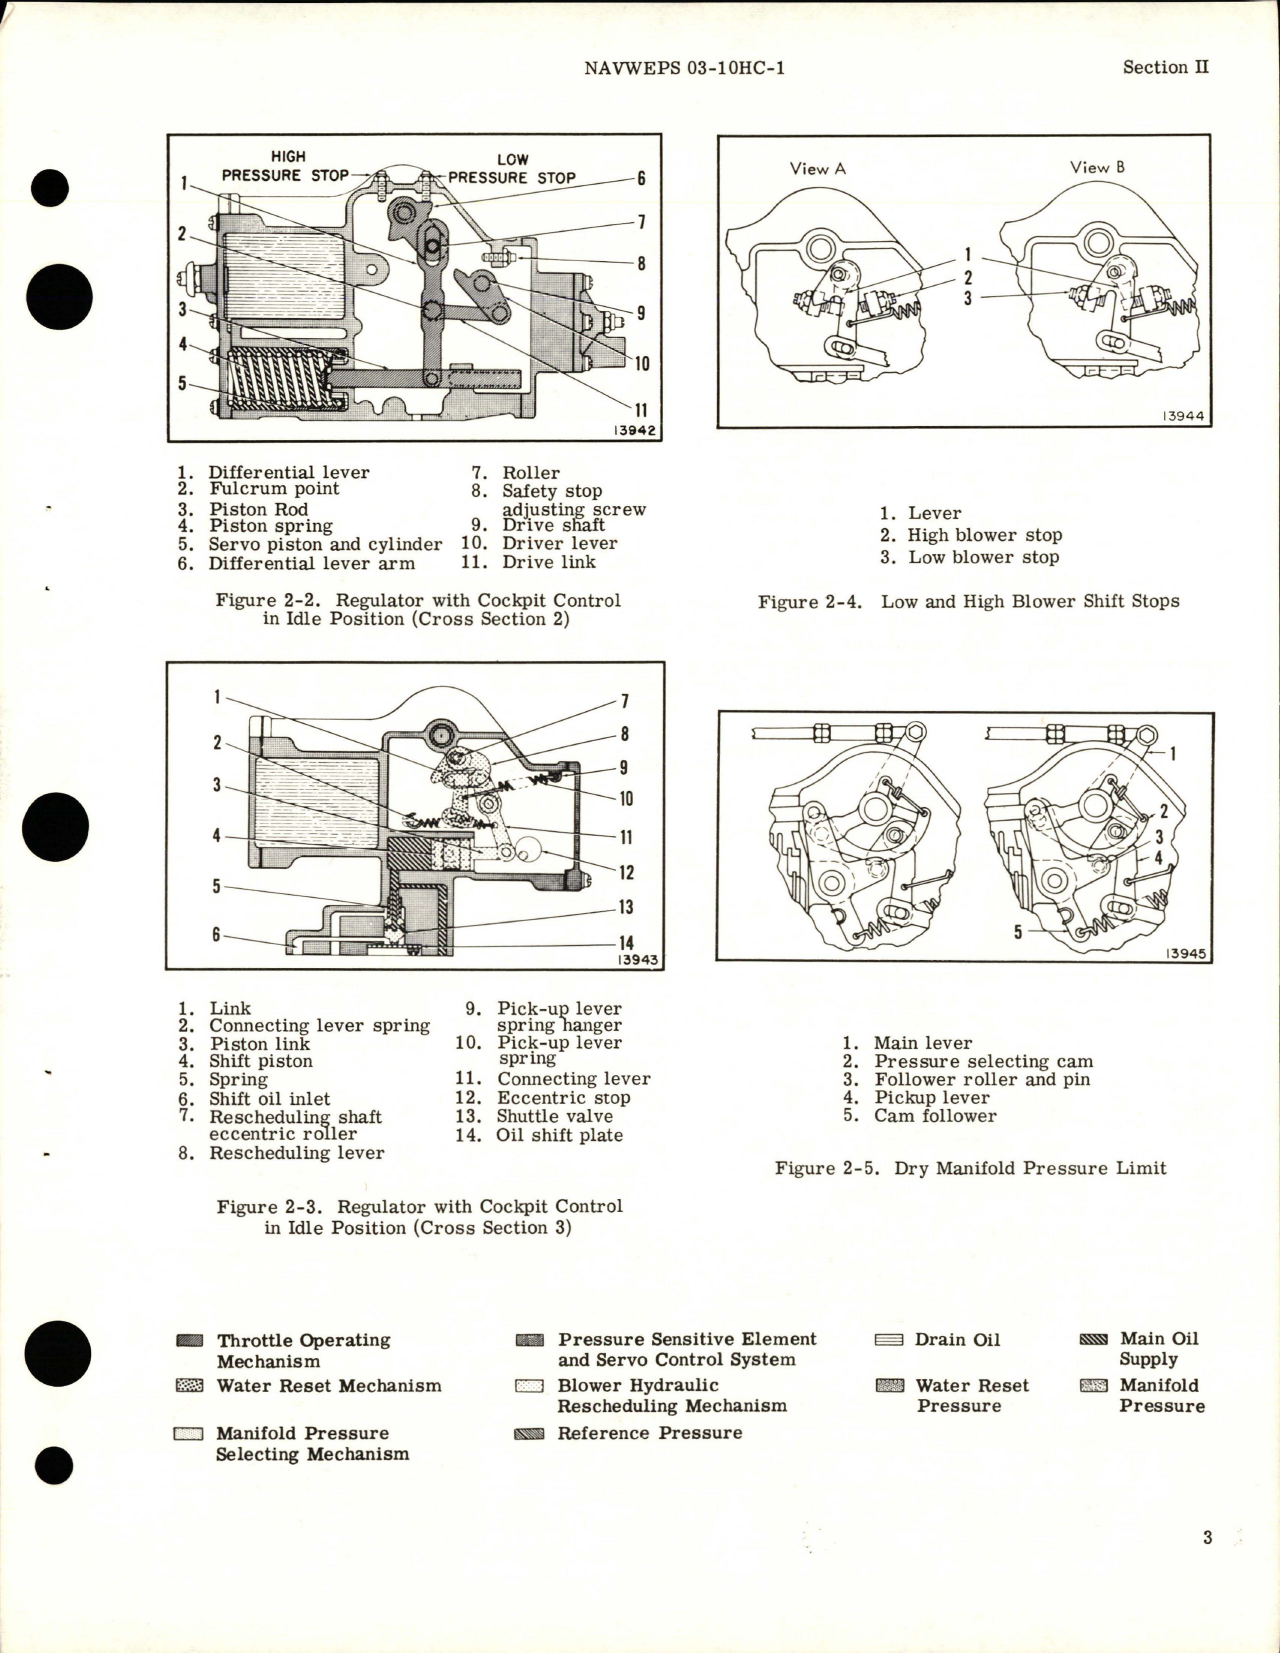 Sample page 9 from AirCorps Library document: Operation, Service, Overhaul Instructions with Parts Catalog for Manifold Pressure Regulator Assembly